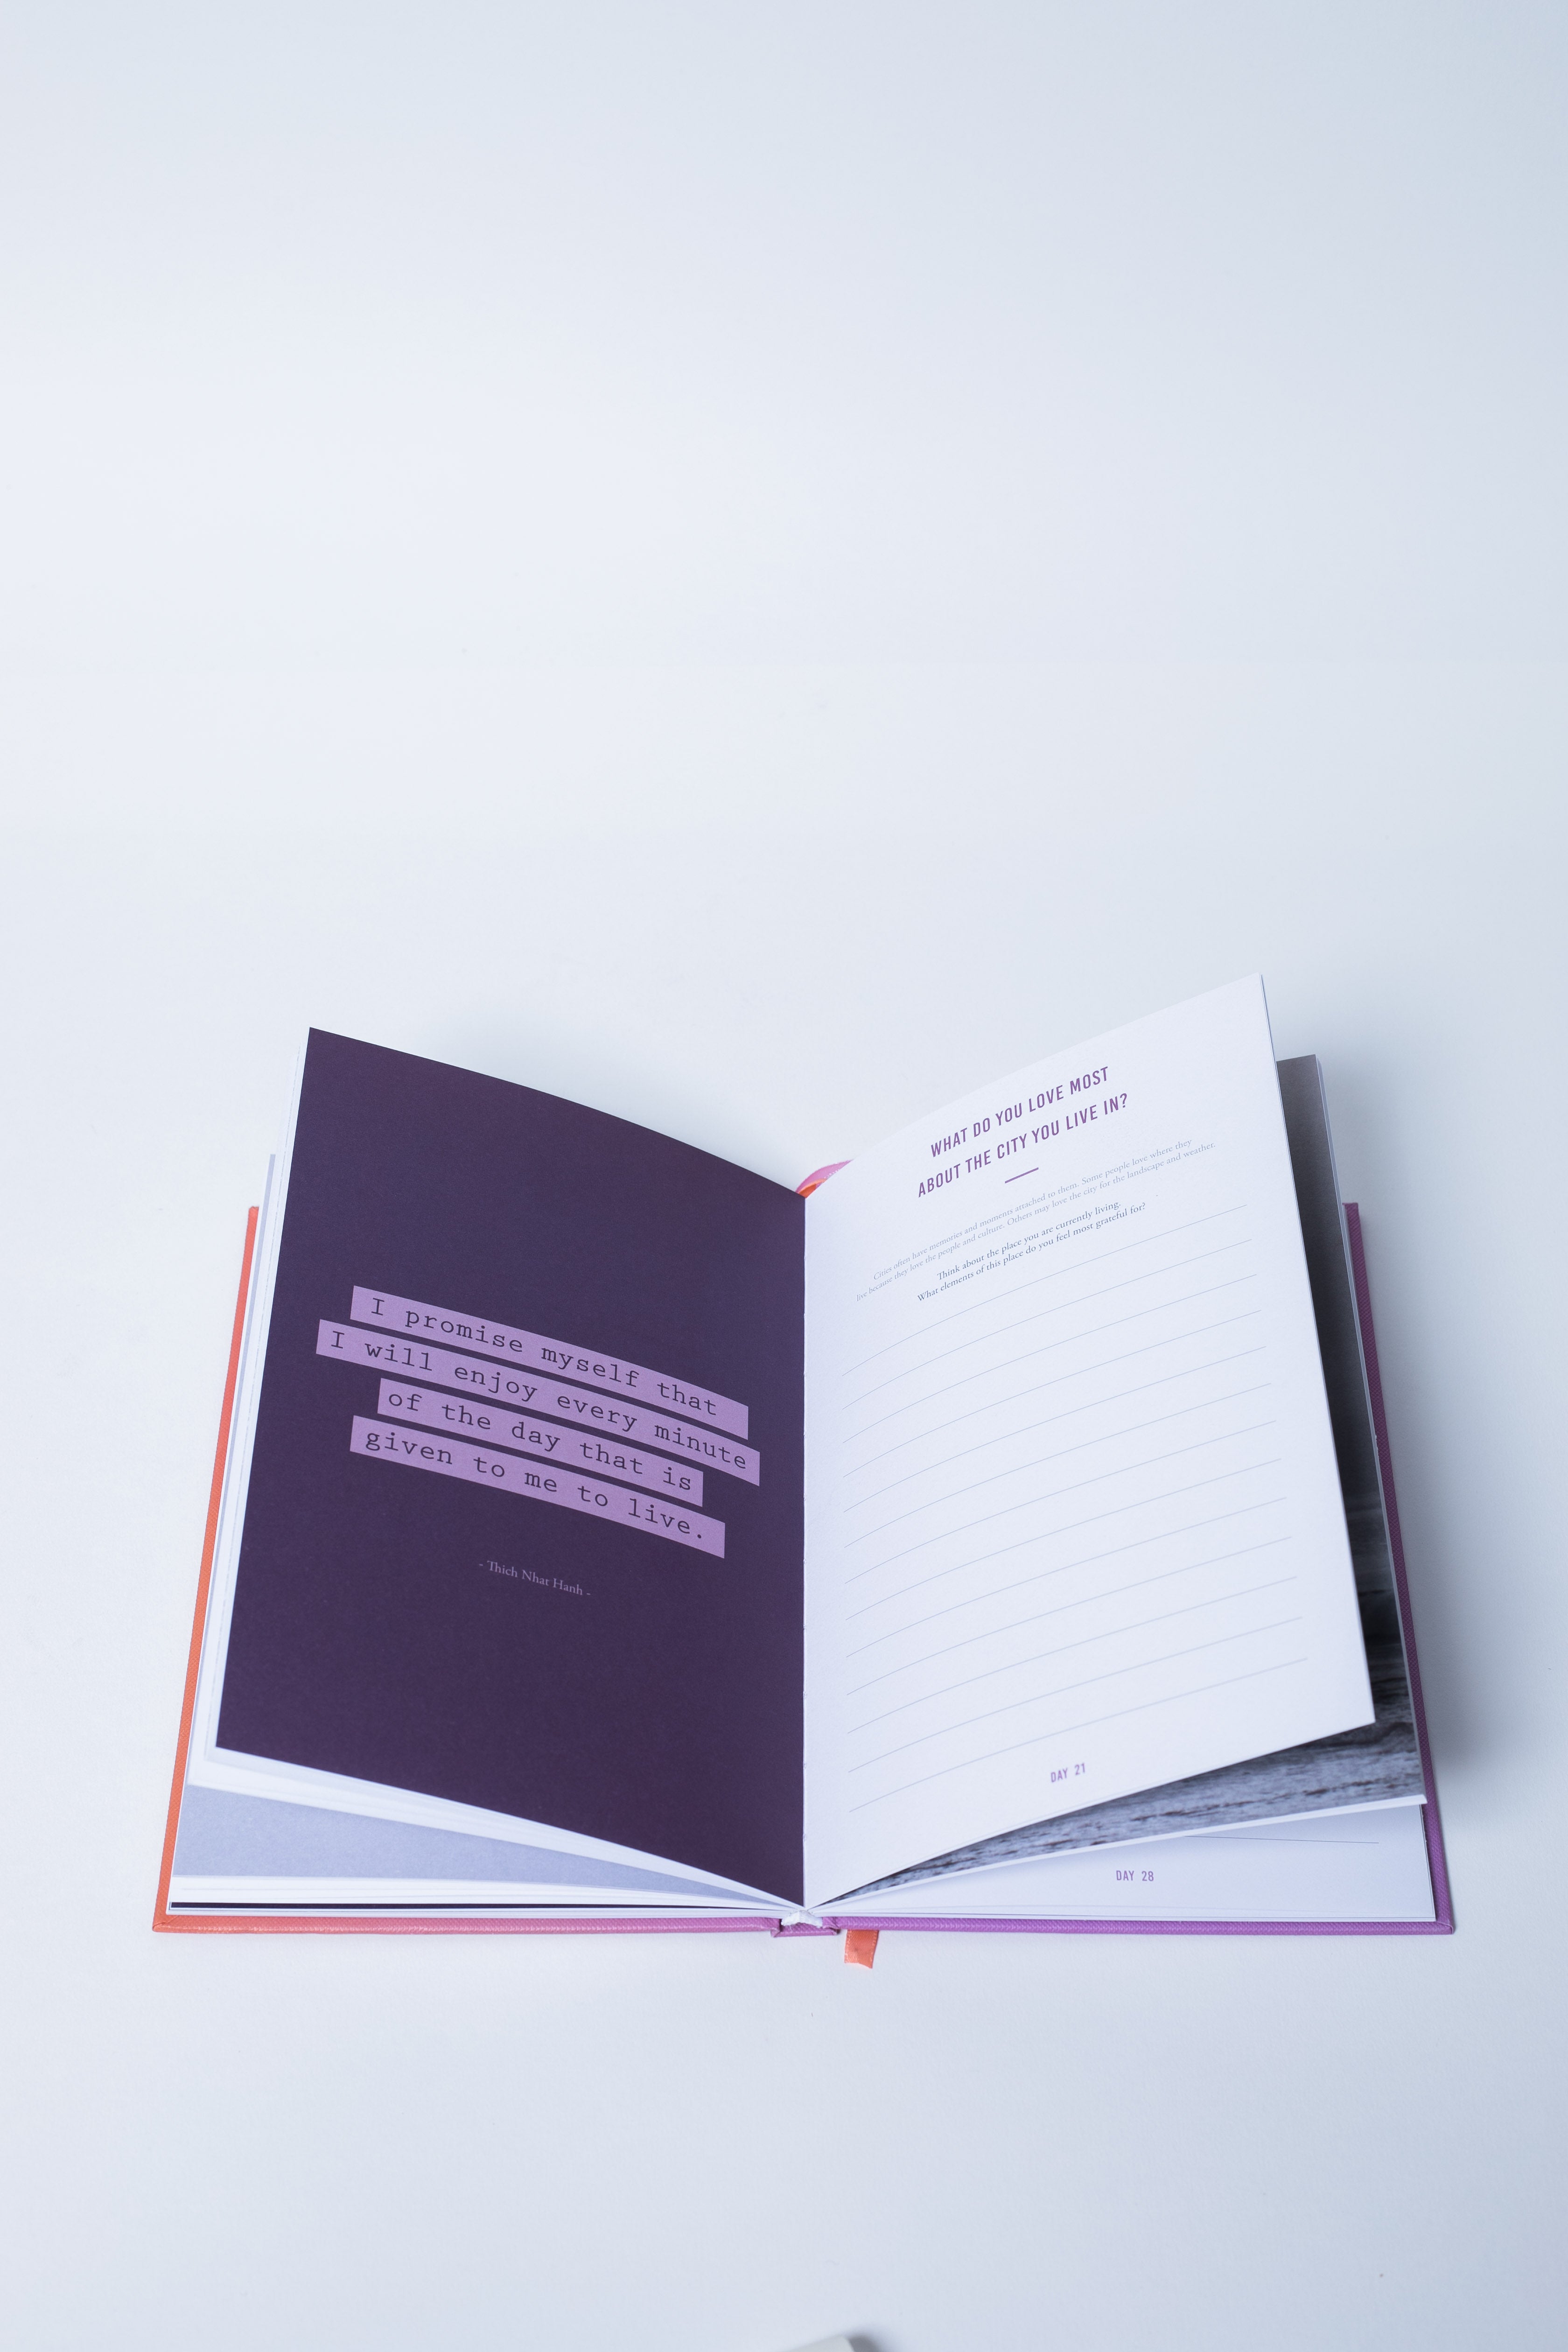 Explore Your Inner World, Guided Journals